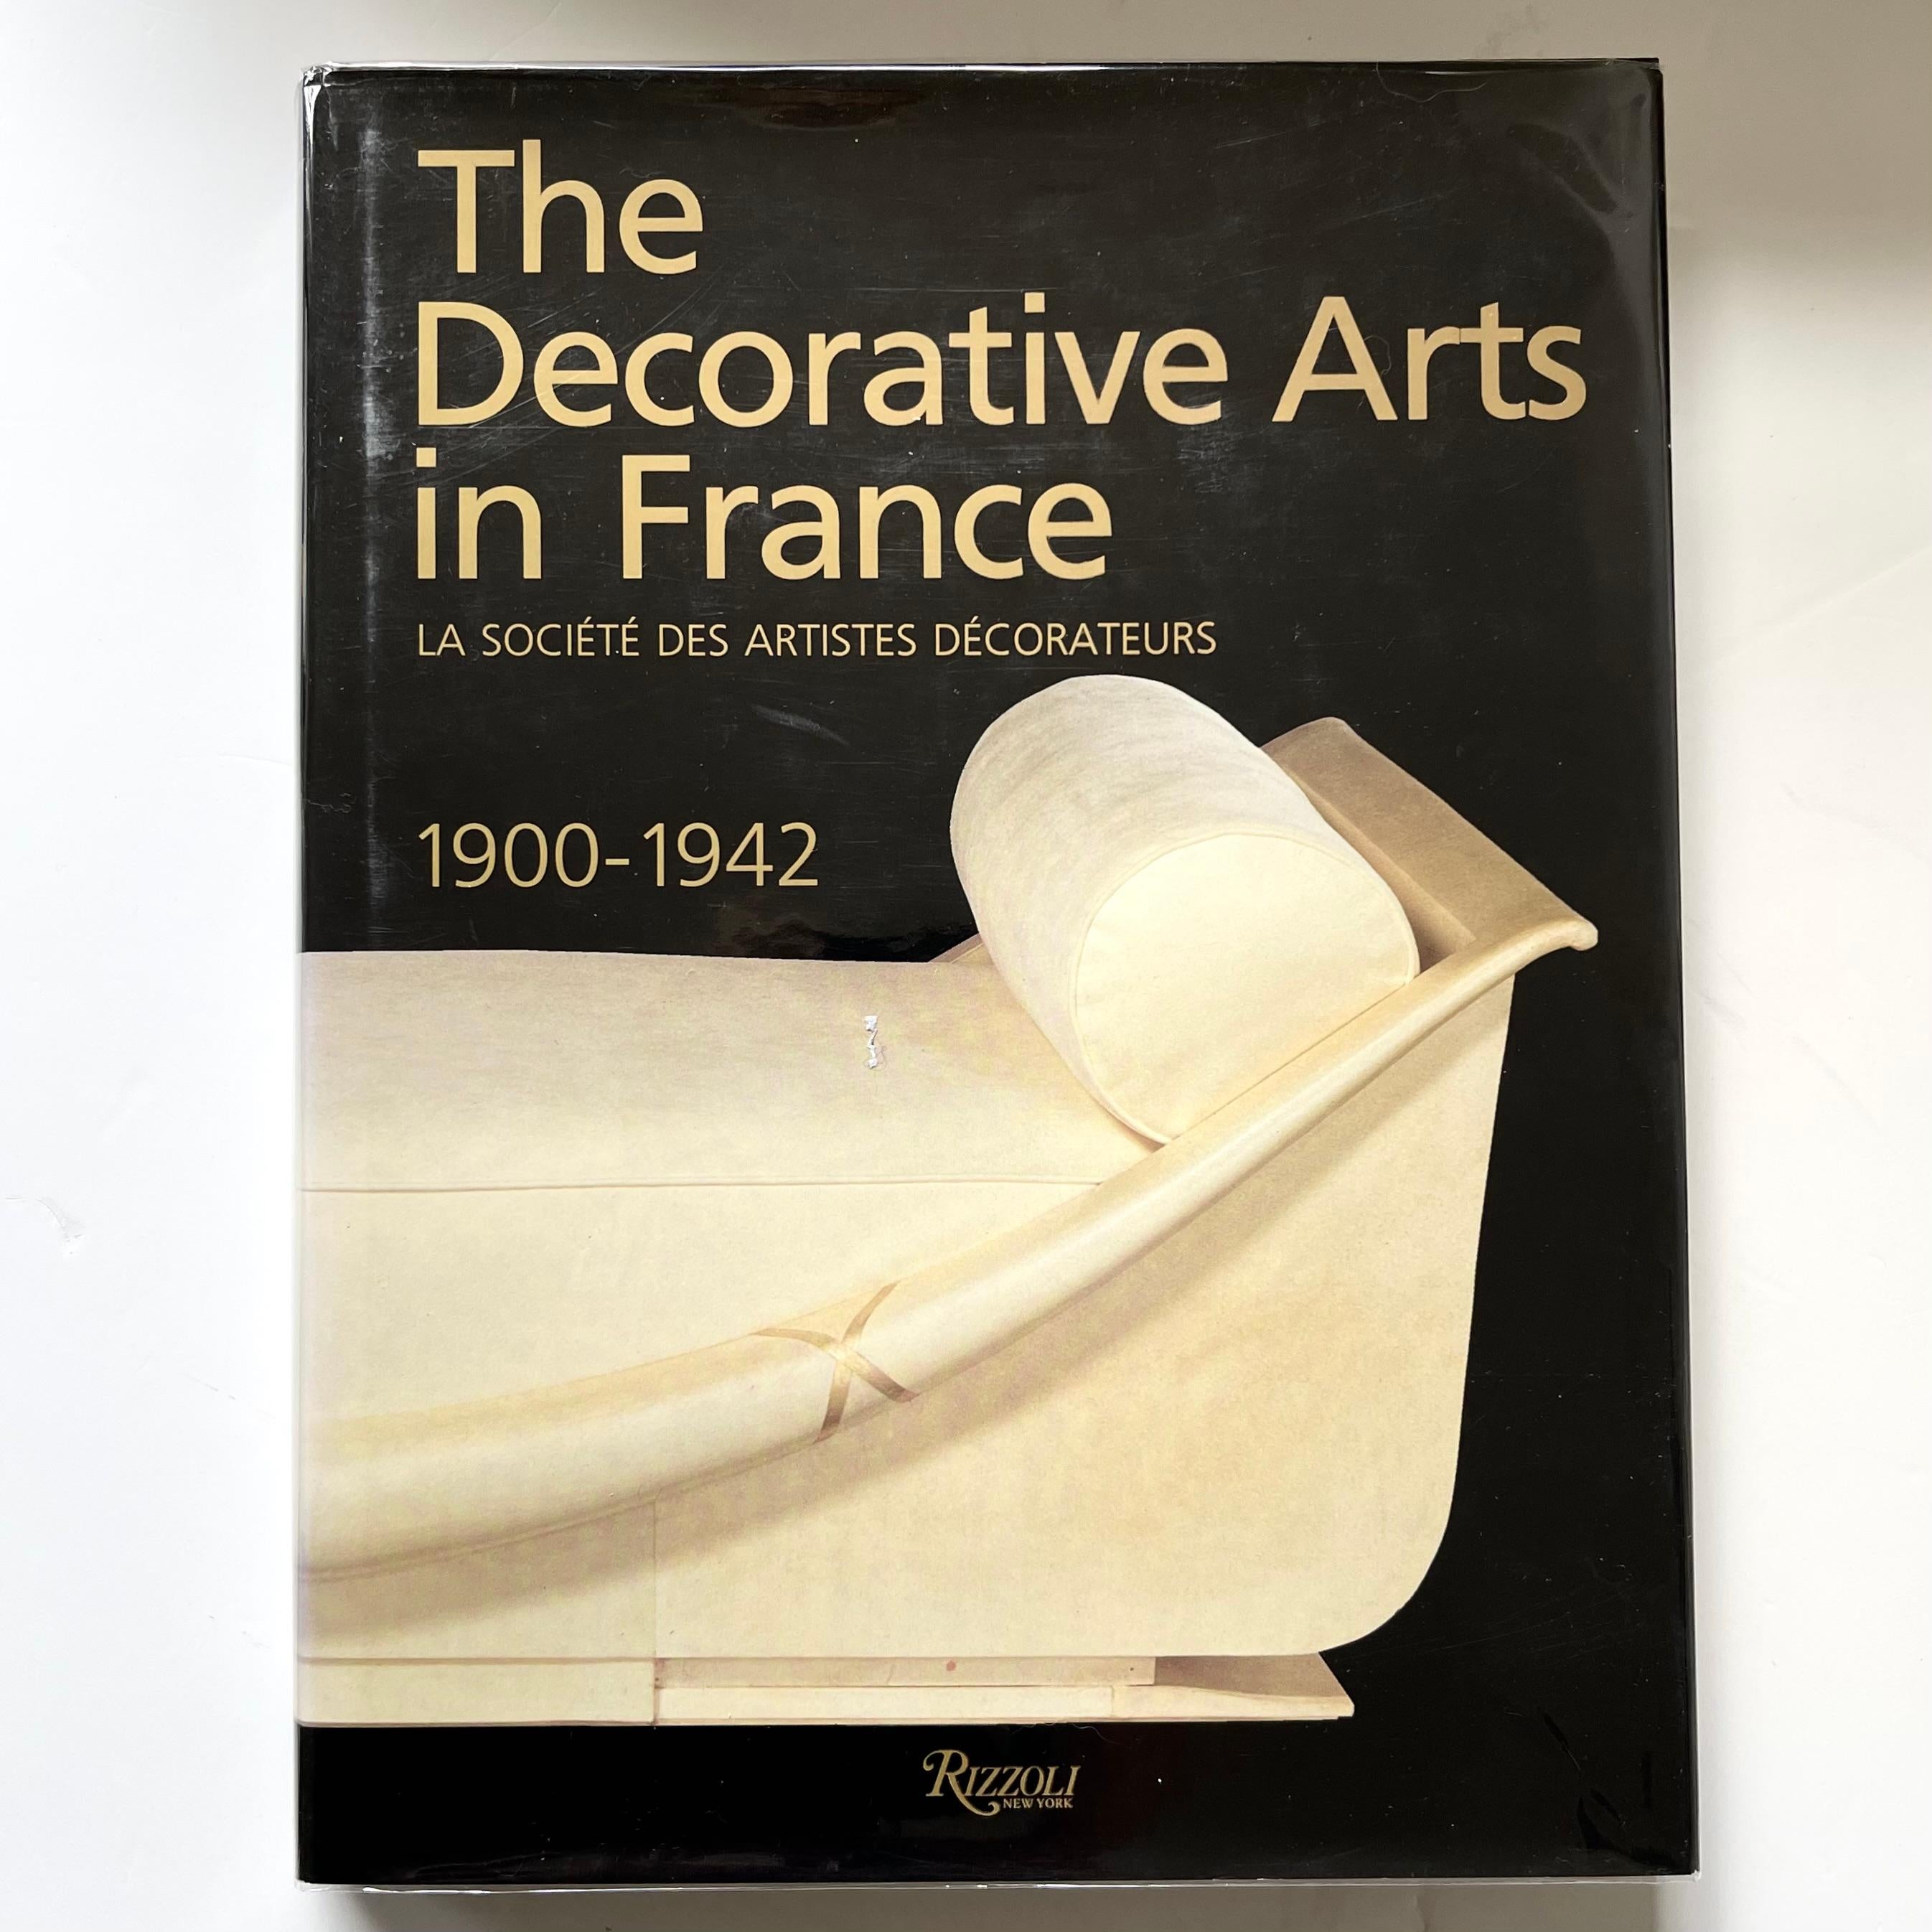 Published by Rizzoli New York 1990. hardback

The go-to reference on the French Society of Decorative Artists arranged chronologically and featuring the work of Guimard, Ruhlmann, Chareau. Lavishly illustrated throughout with numerous archive